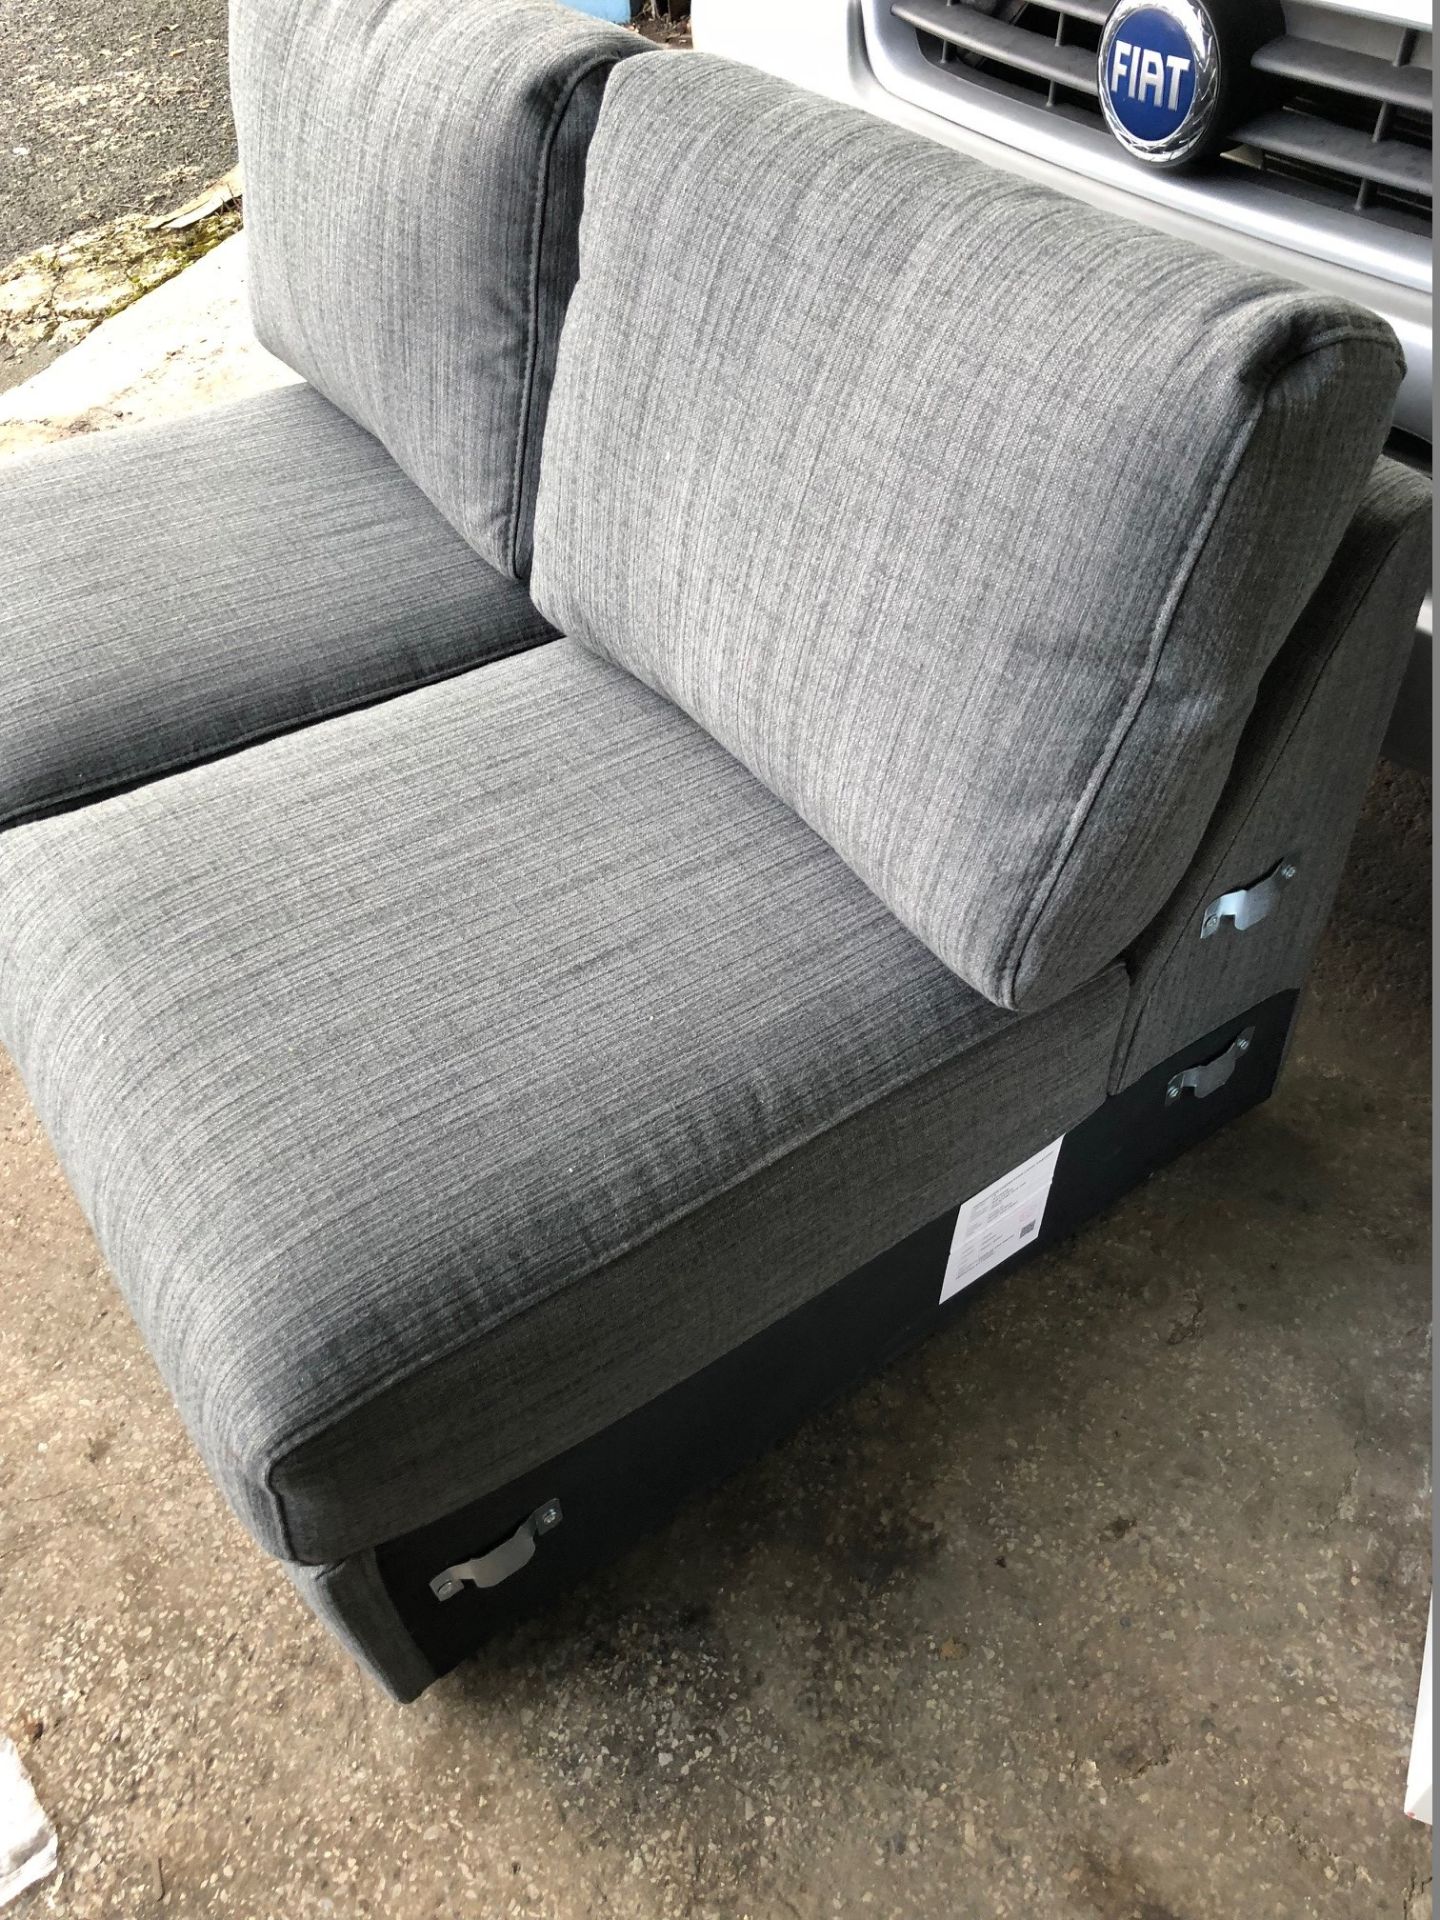 2 Seater Sofa - Image 2 of 2